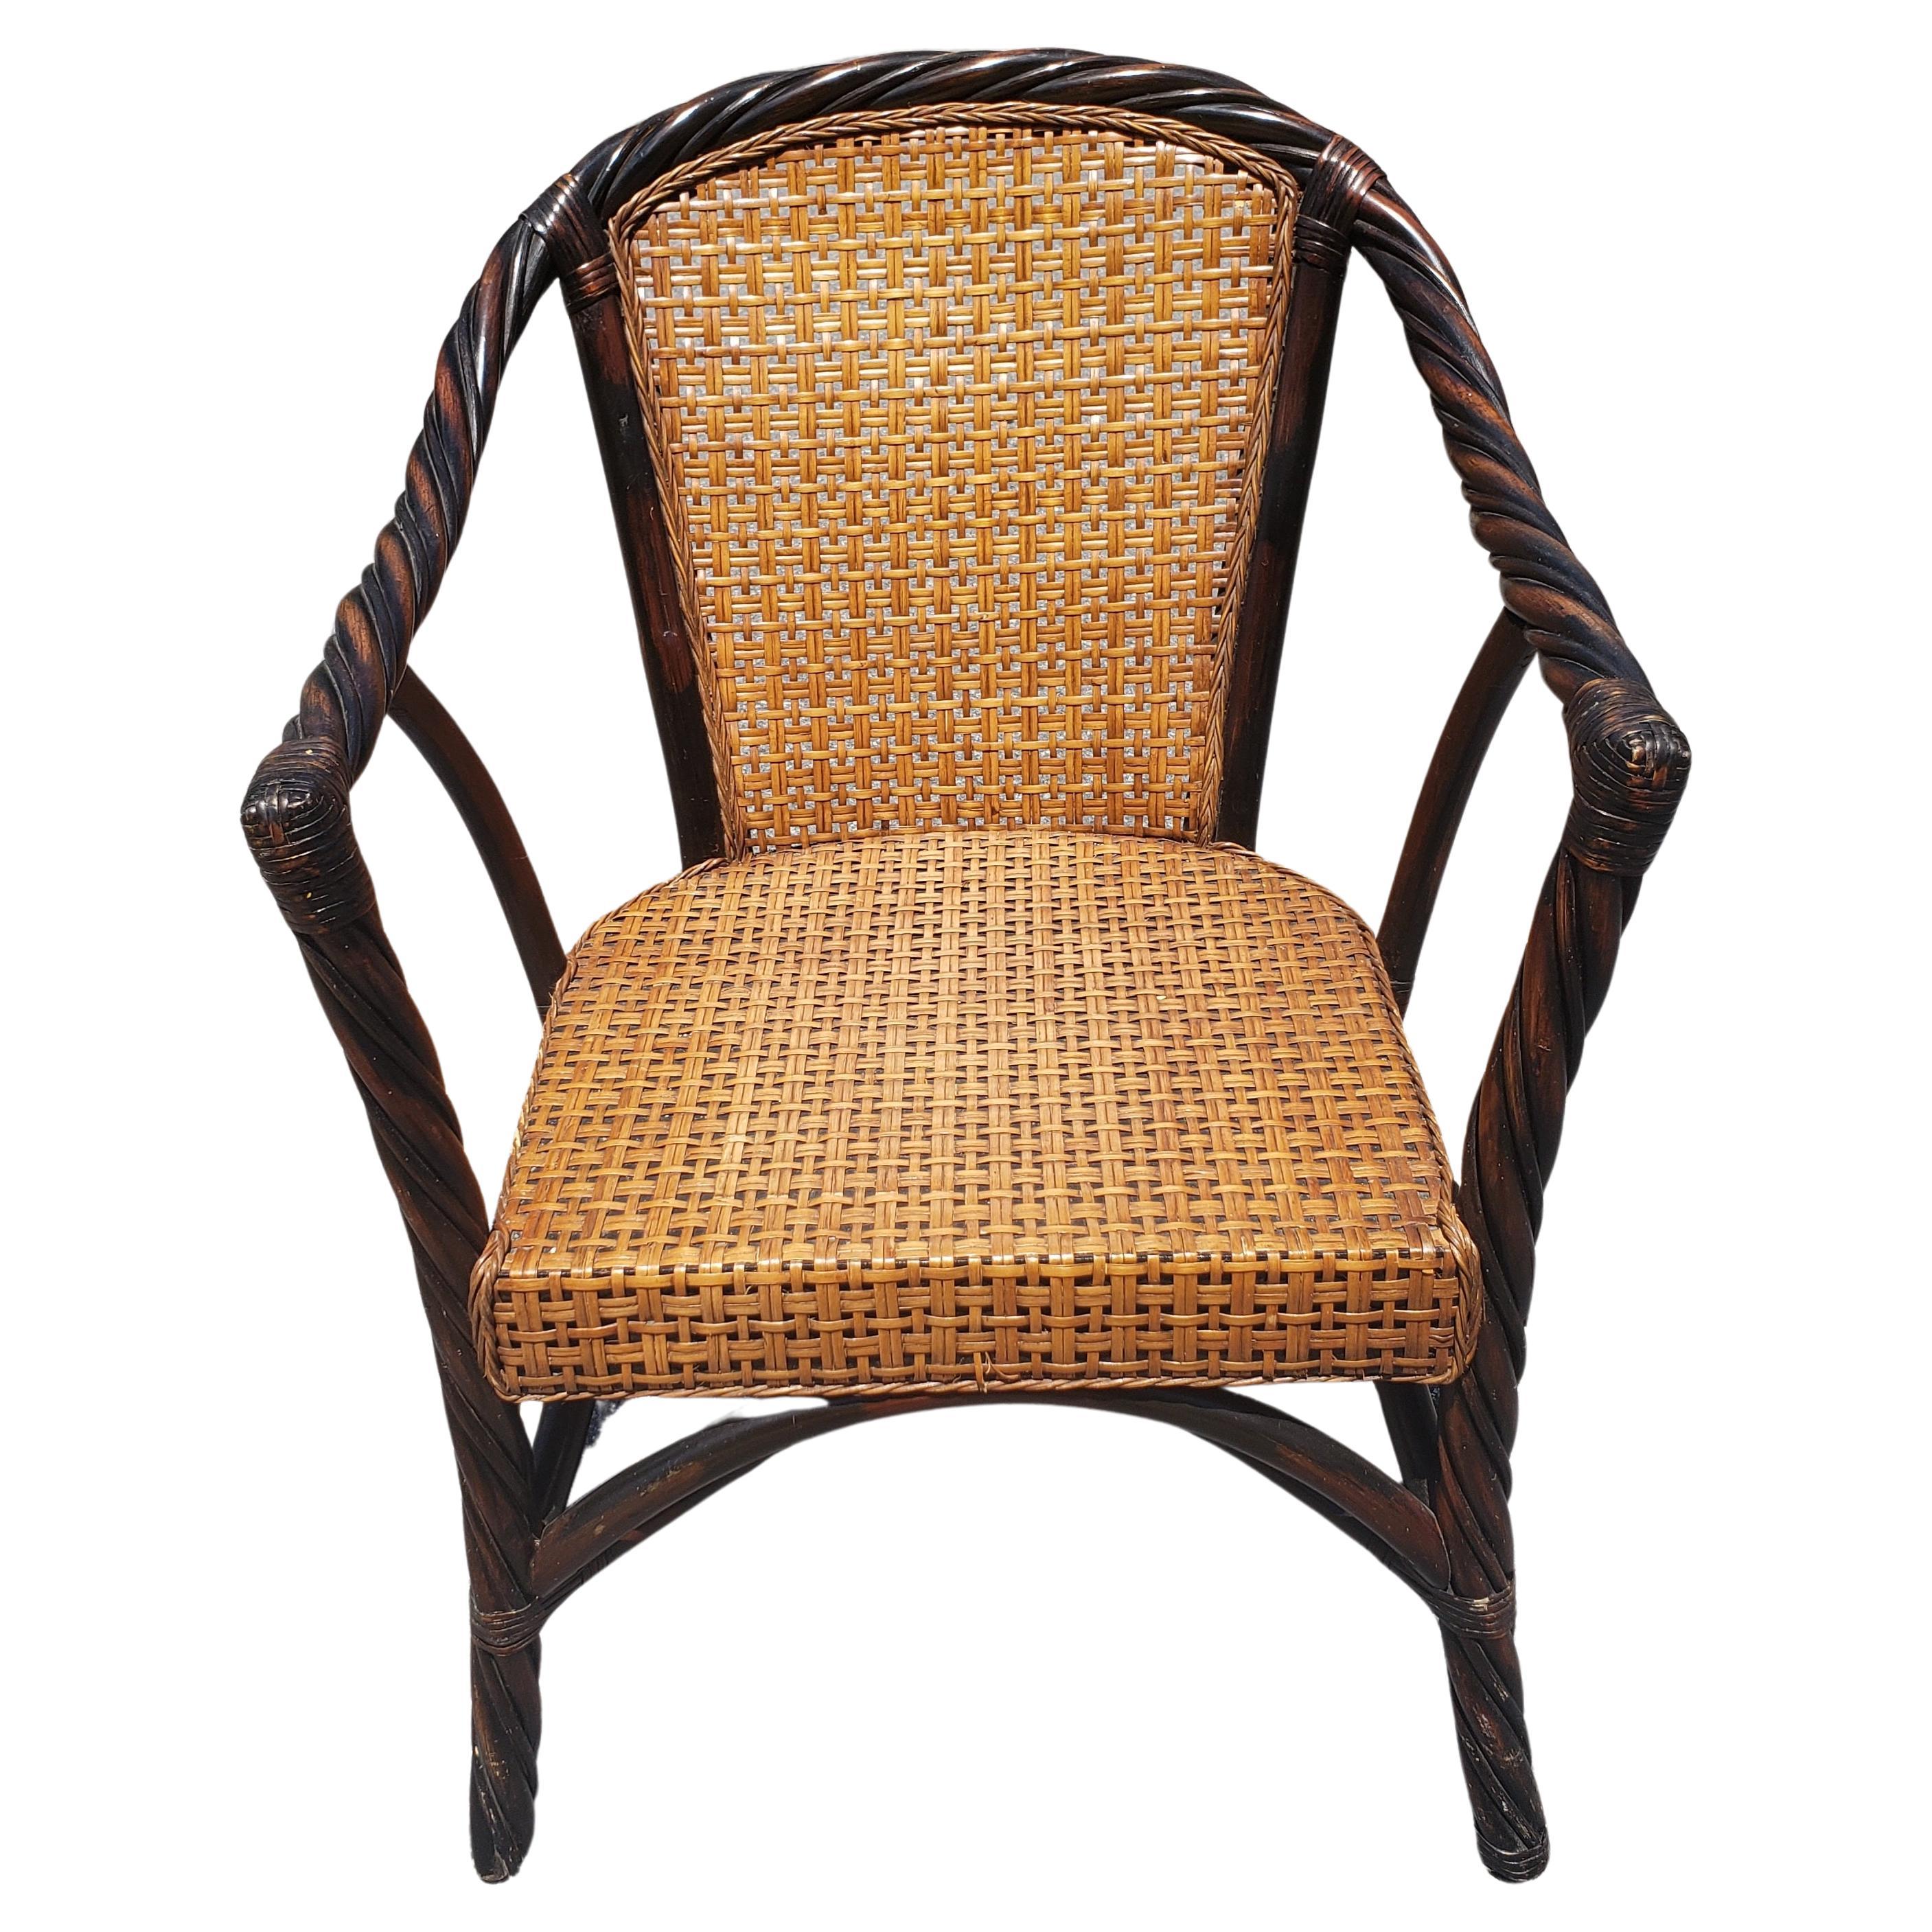 Vintage Barley Twist Ebonized Rattan and Wicker Seat and Back Armchair